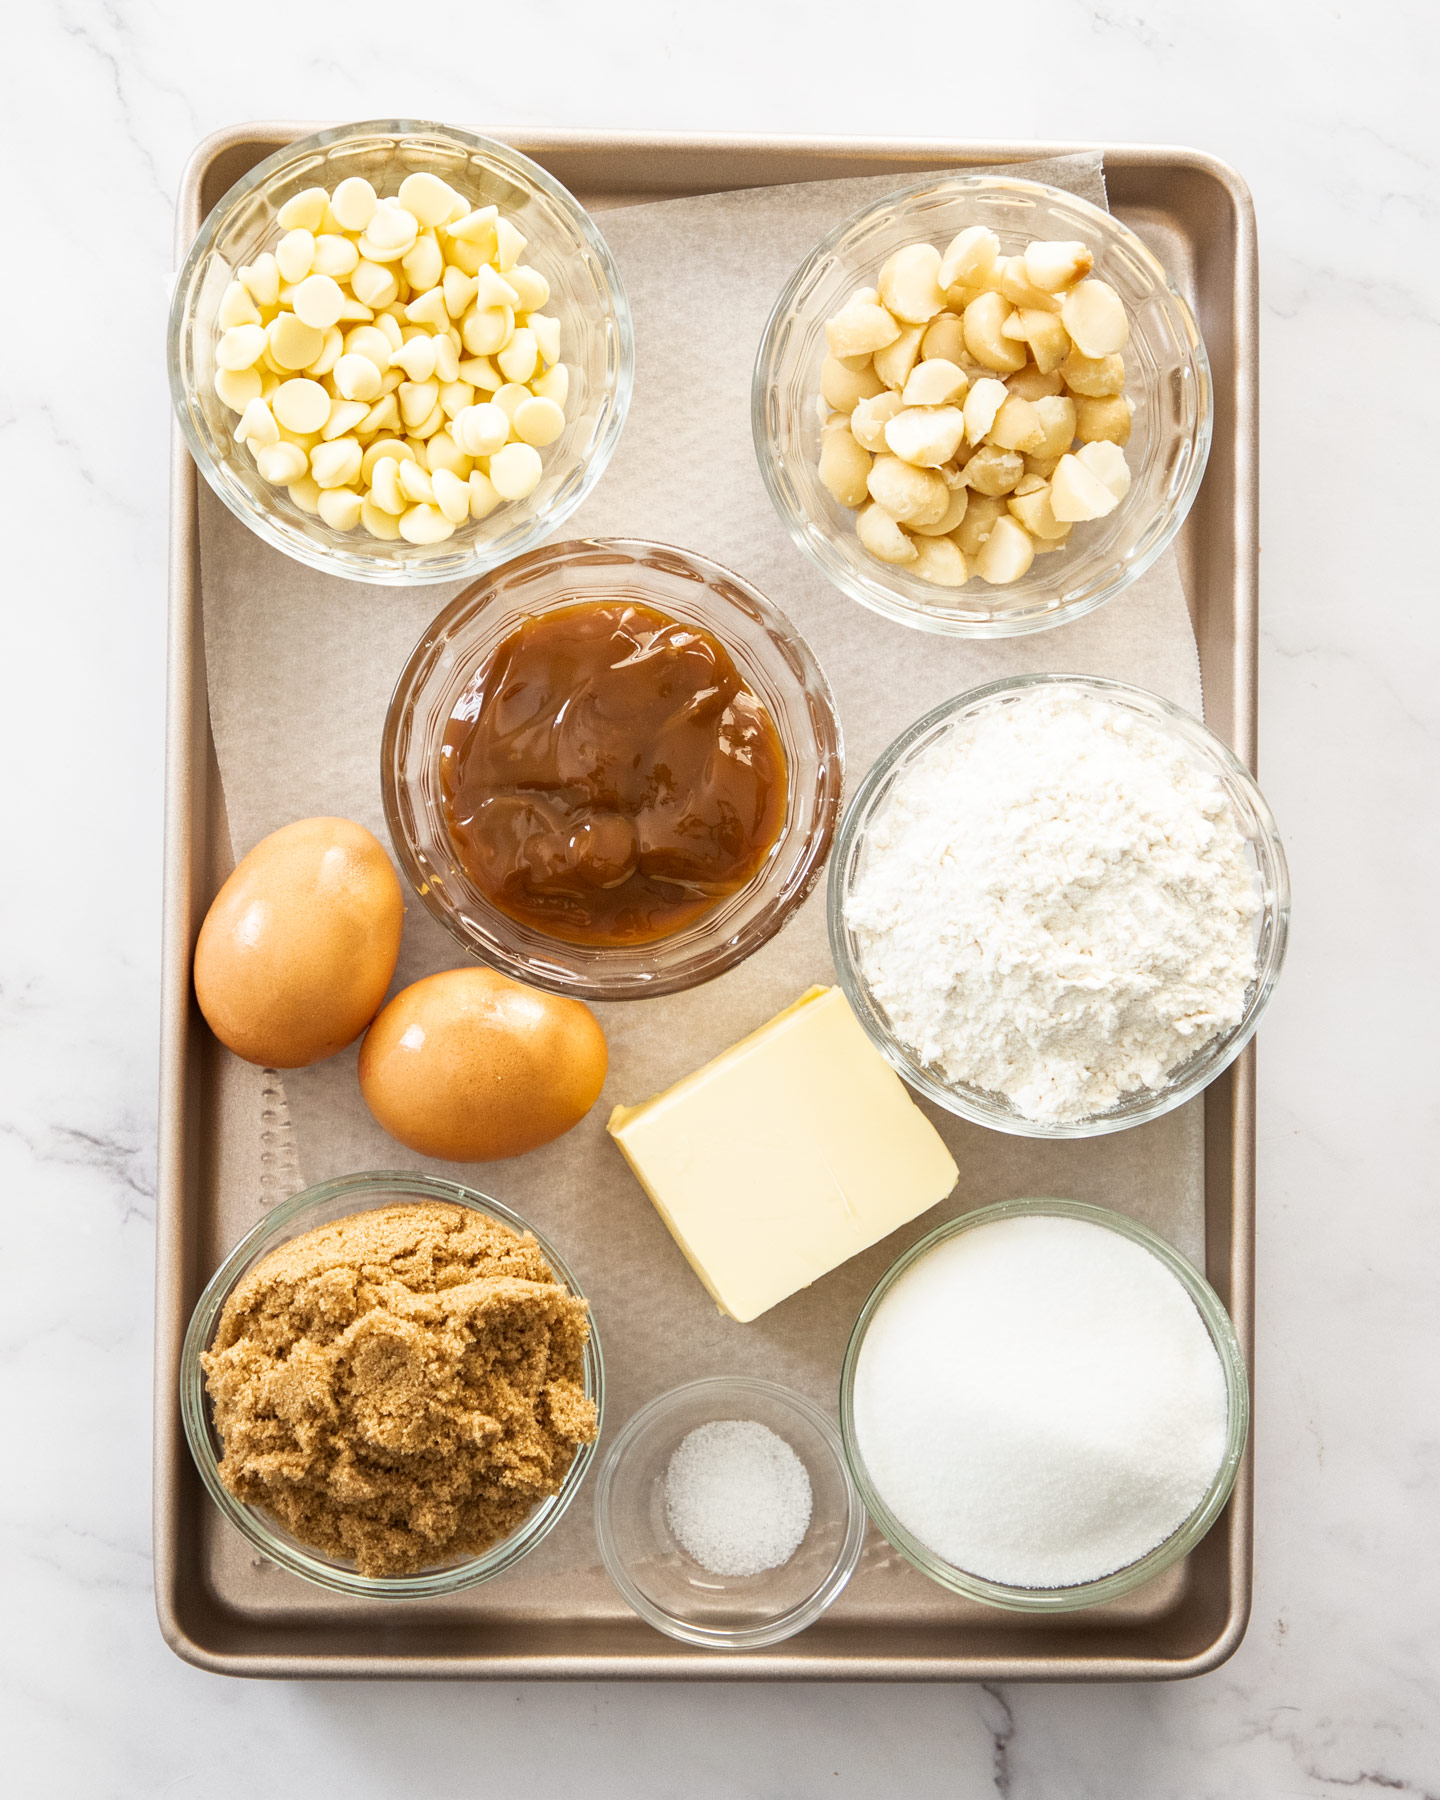 Ingredients for caramel blondies on a baking tray.